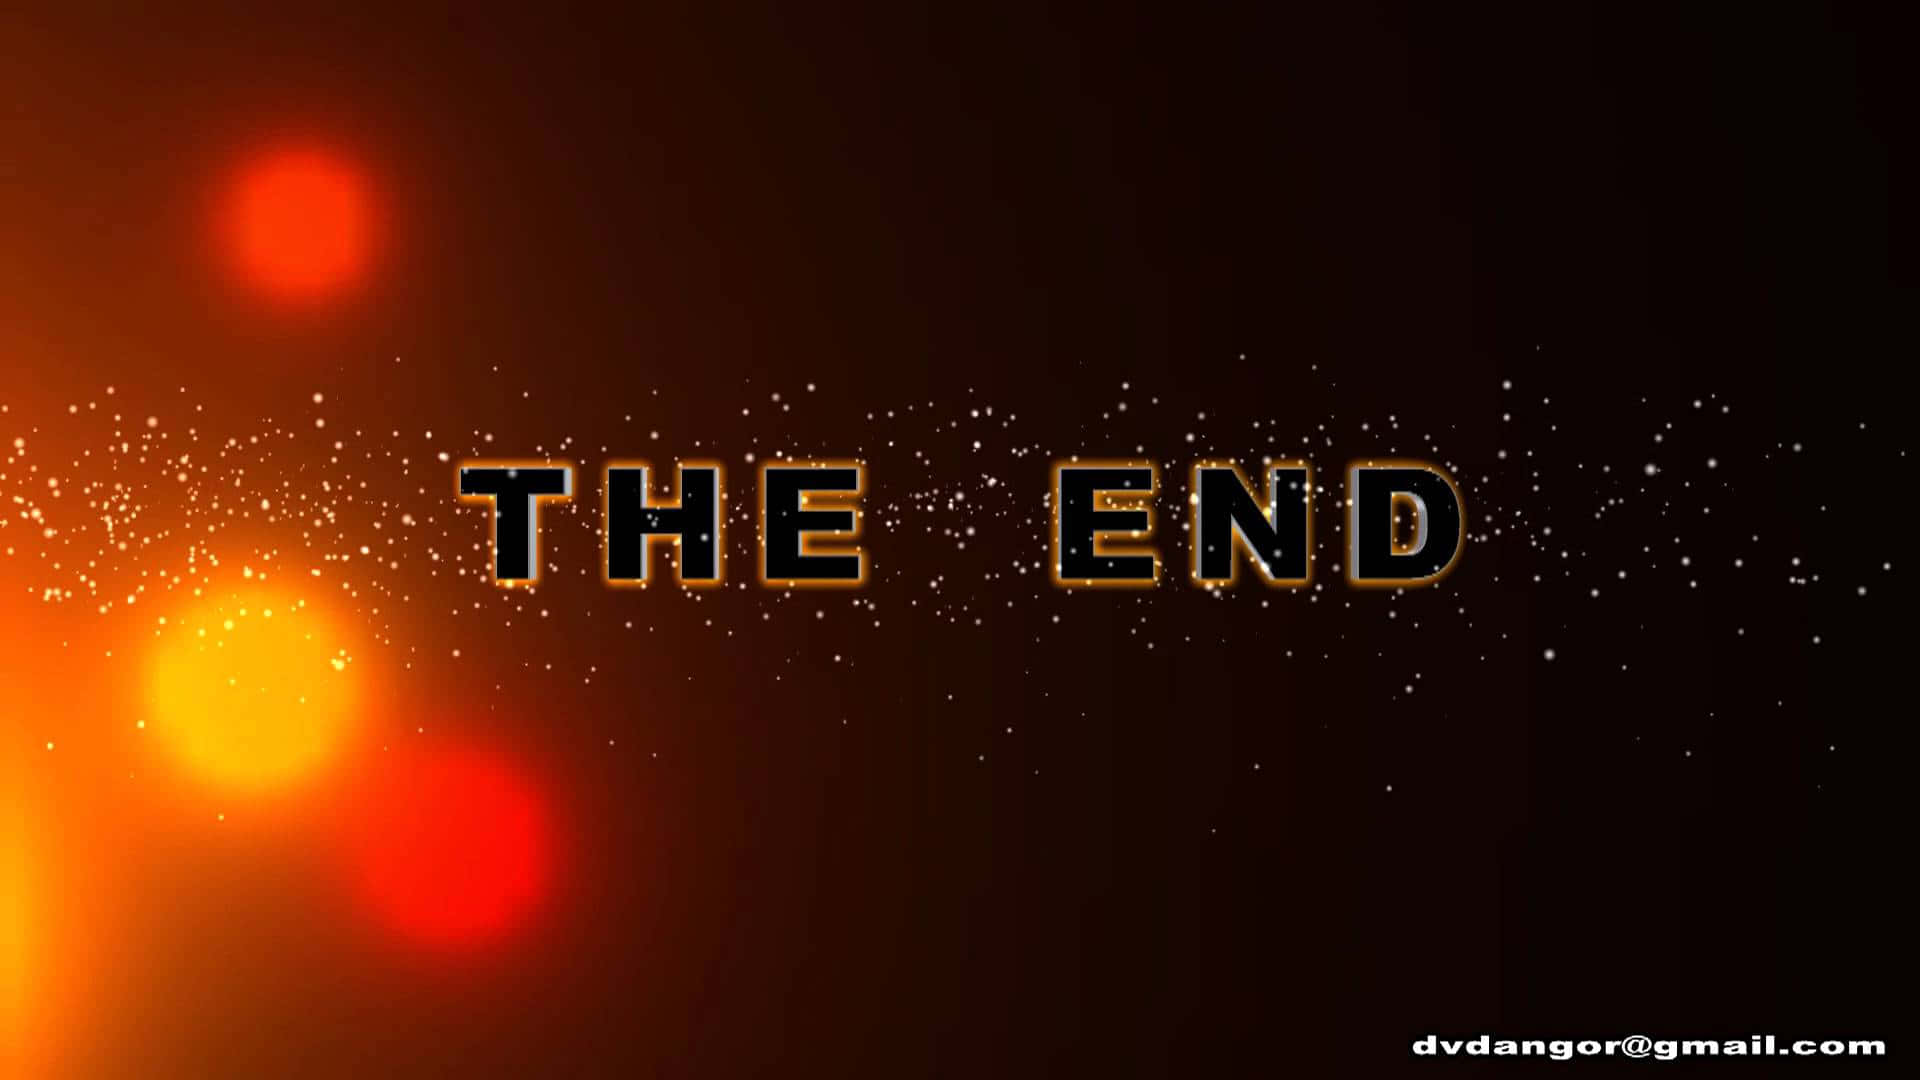 It's The End Of The Journey Background